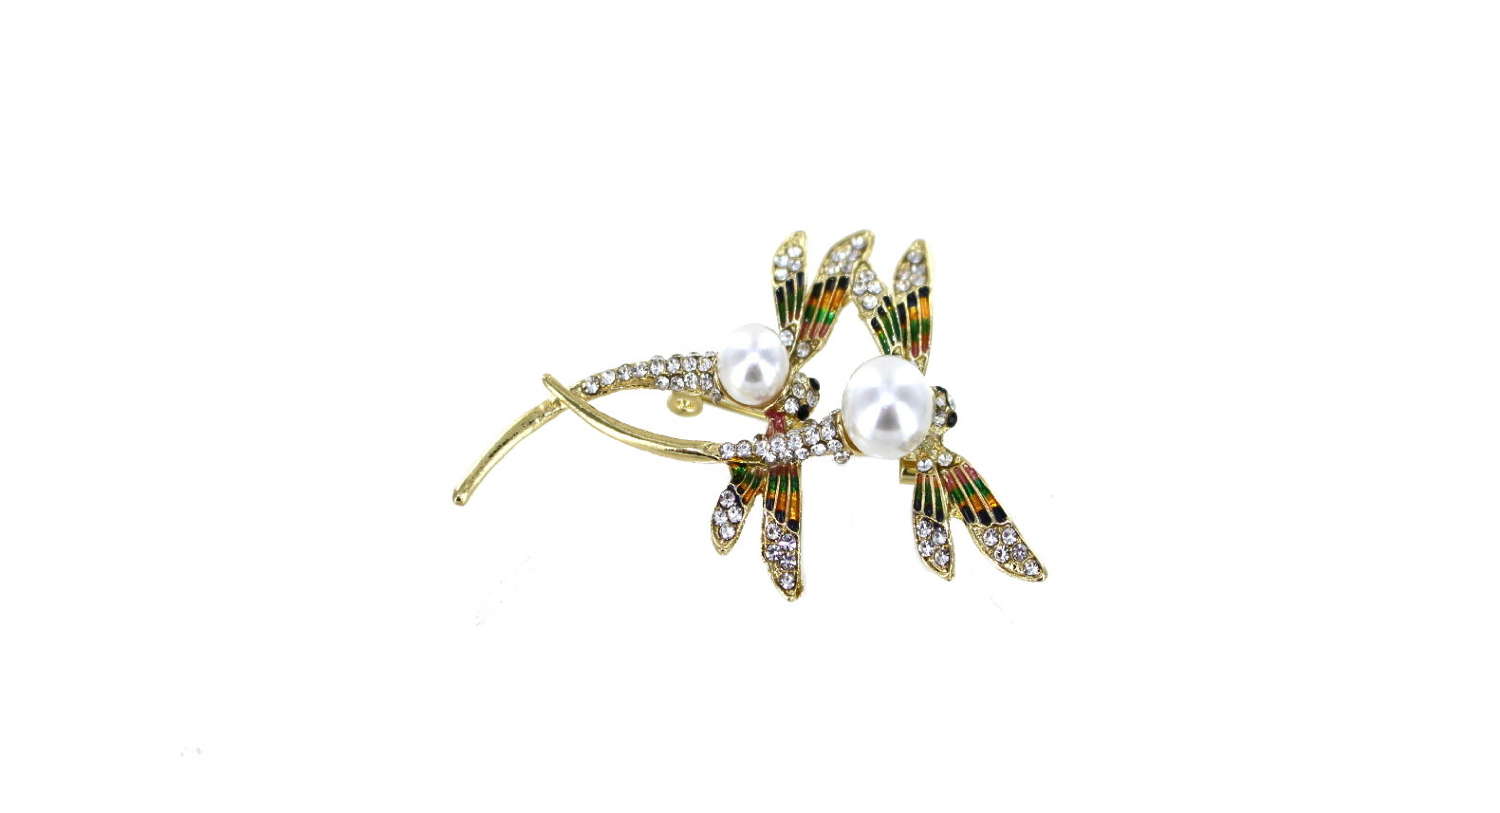 Double dragonfly brooch with diamanté and faux pearl detail.